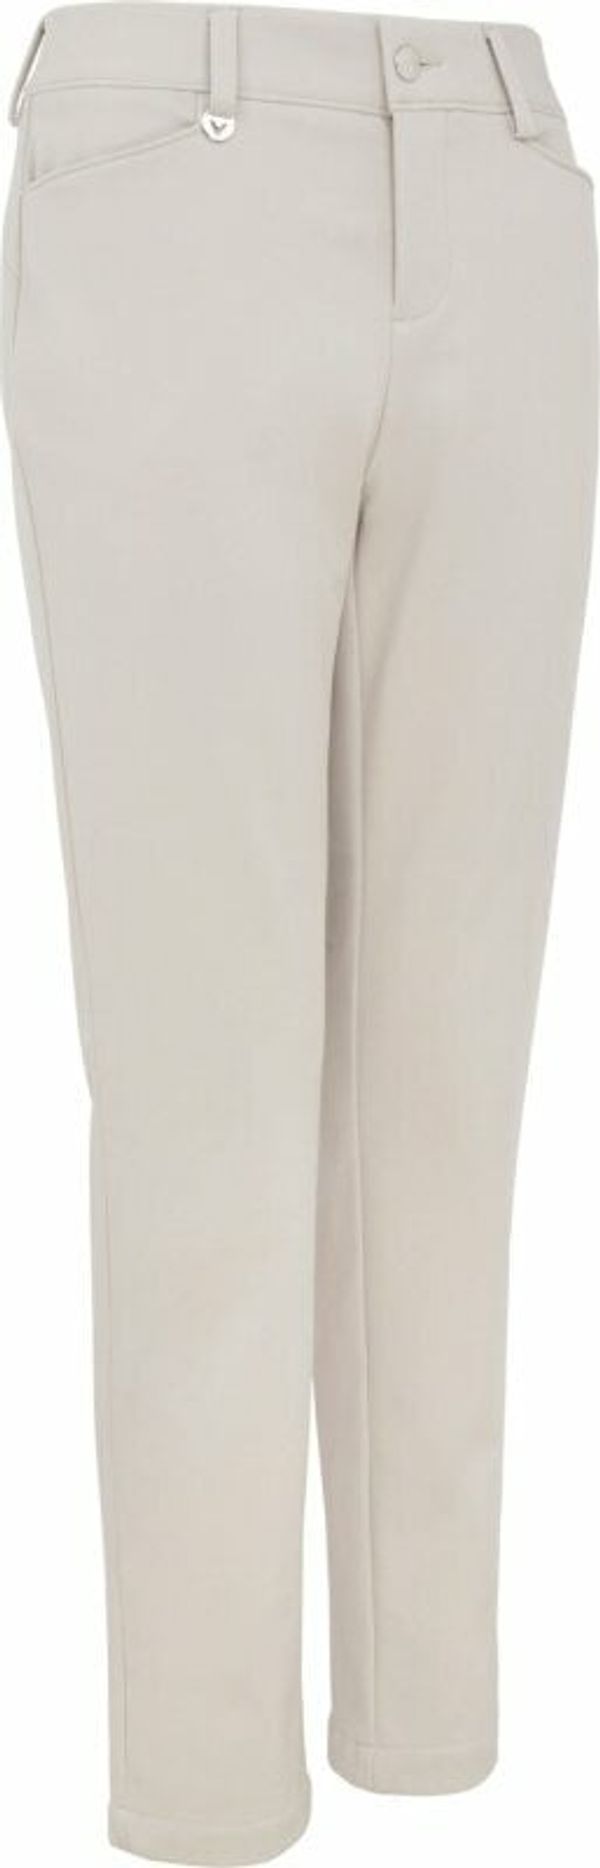 Callaway Callaway Thermal Womens Trousers Chateau Gray 4/32